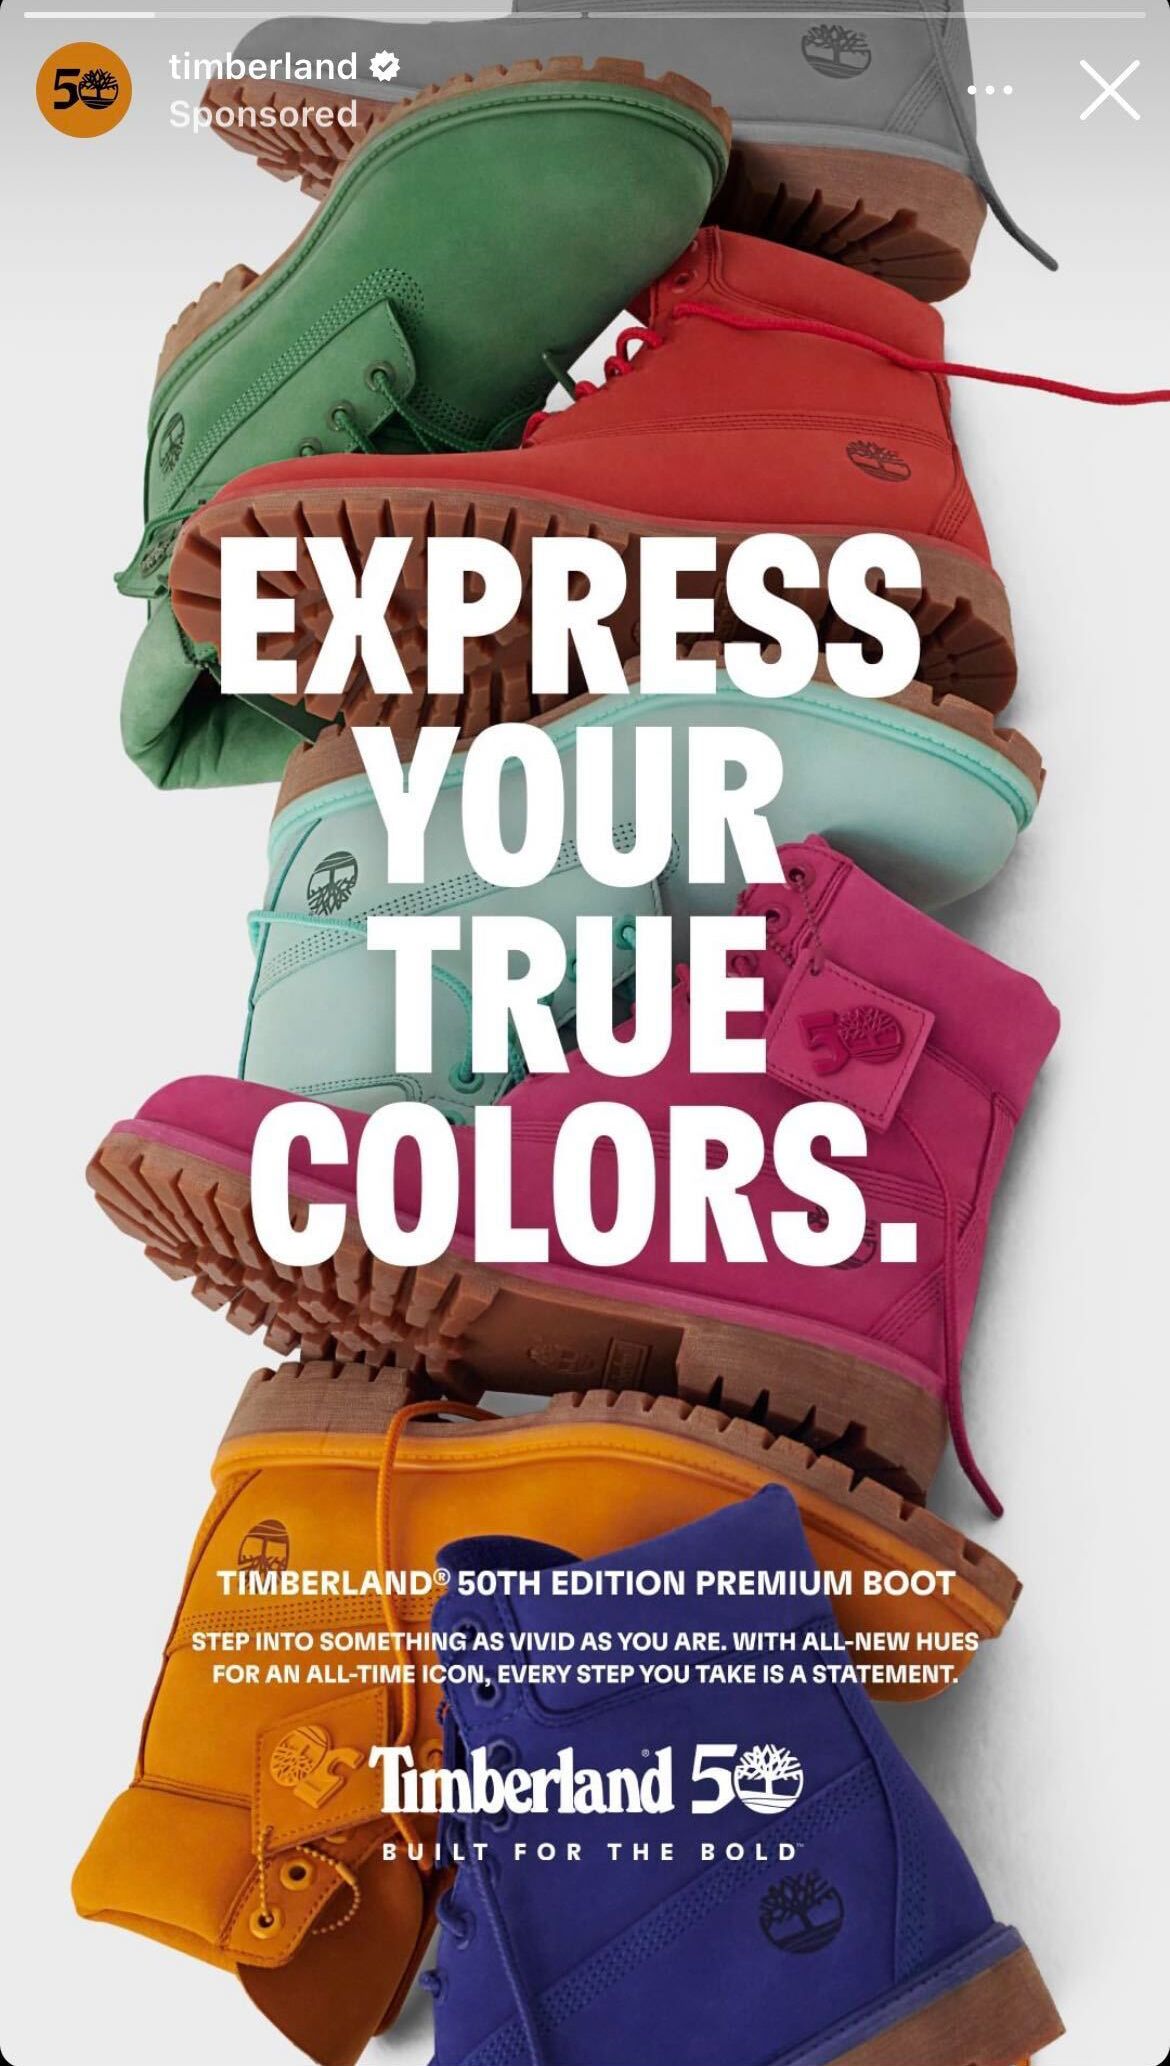 An ad for timberland boots with the words express your true colors.